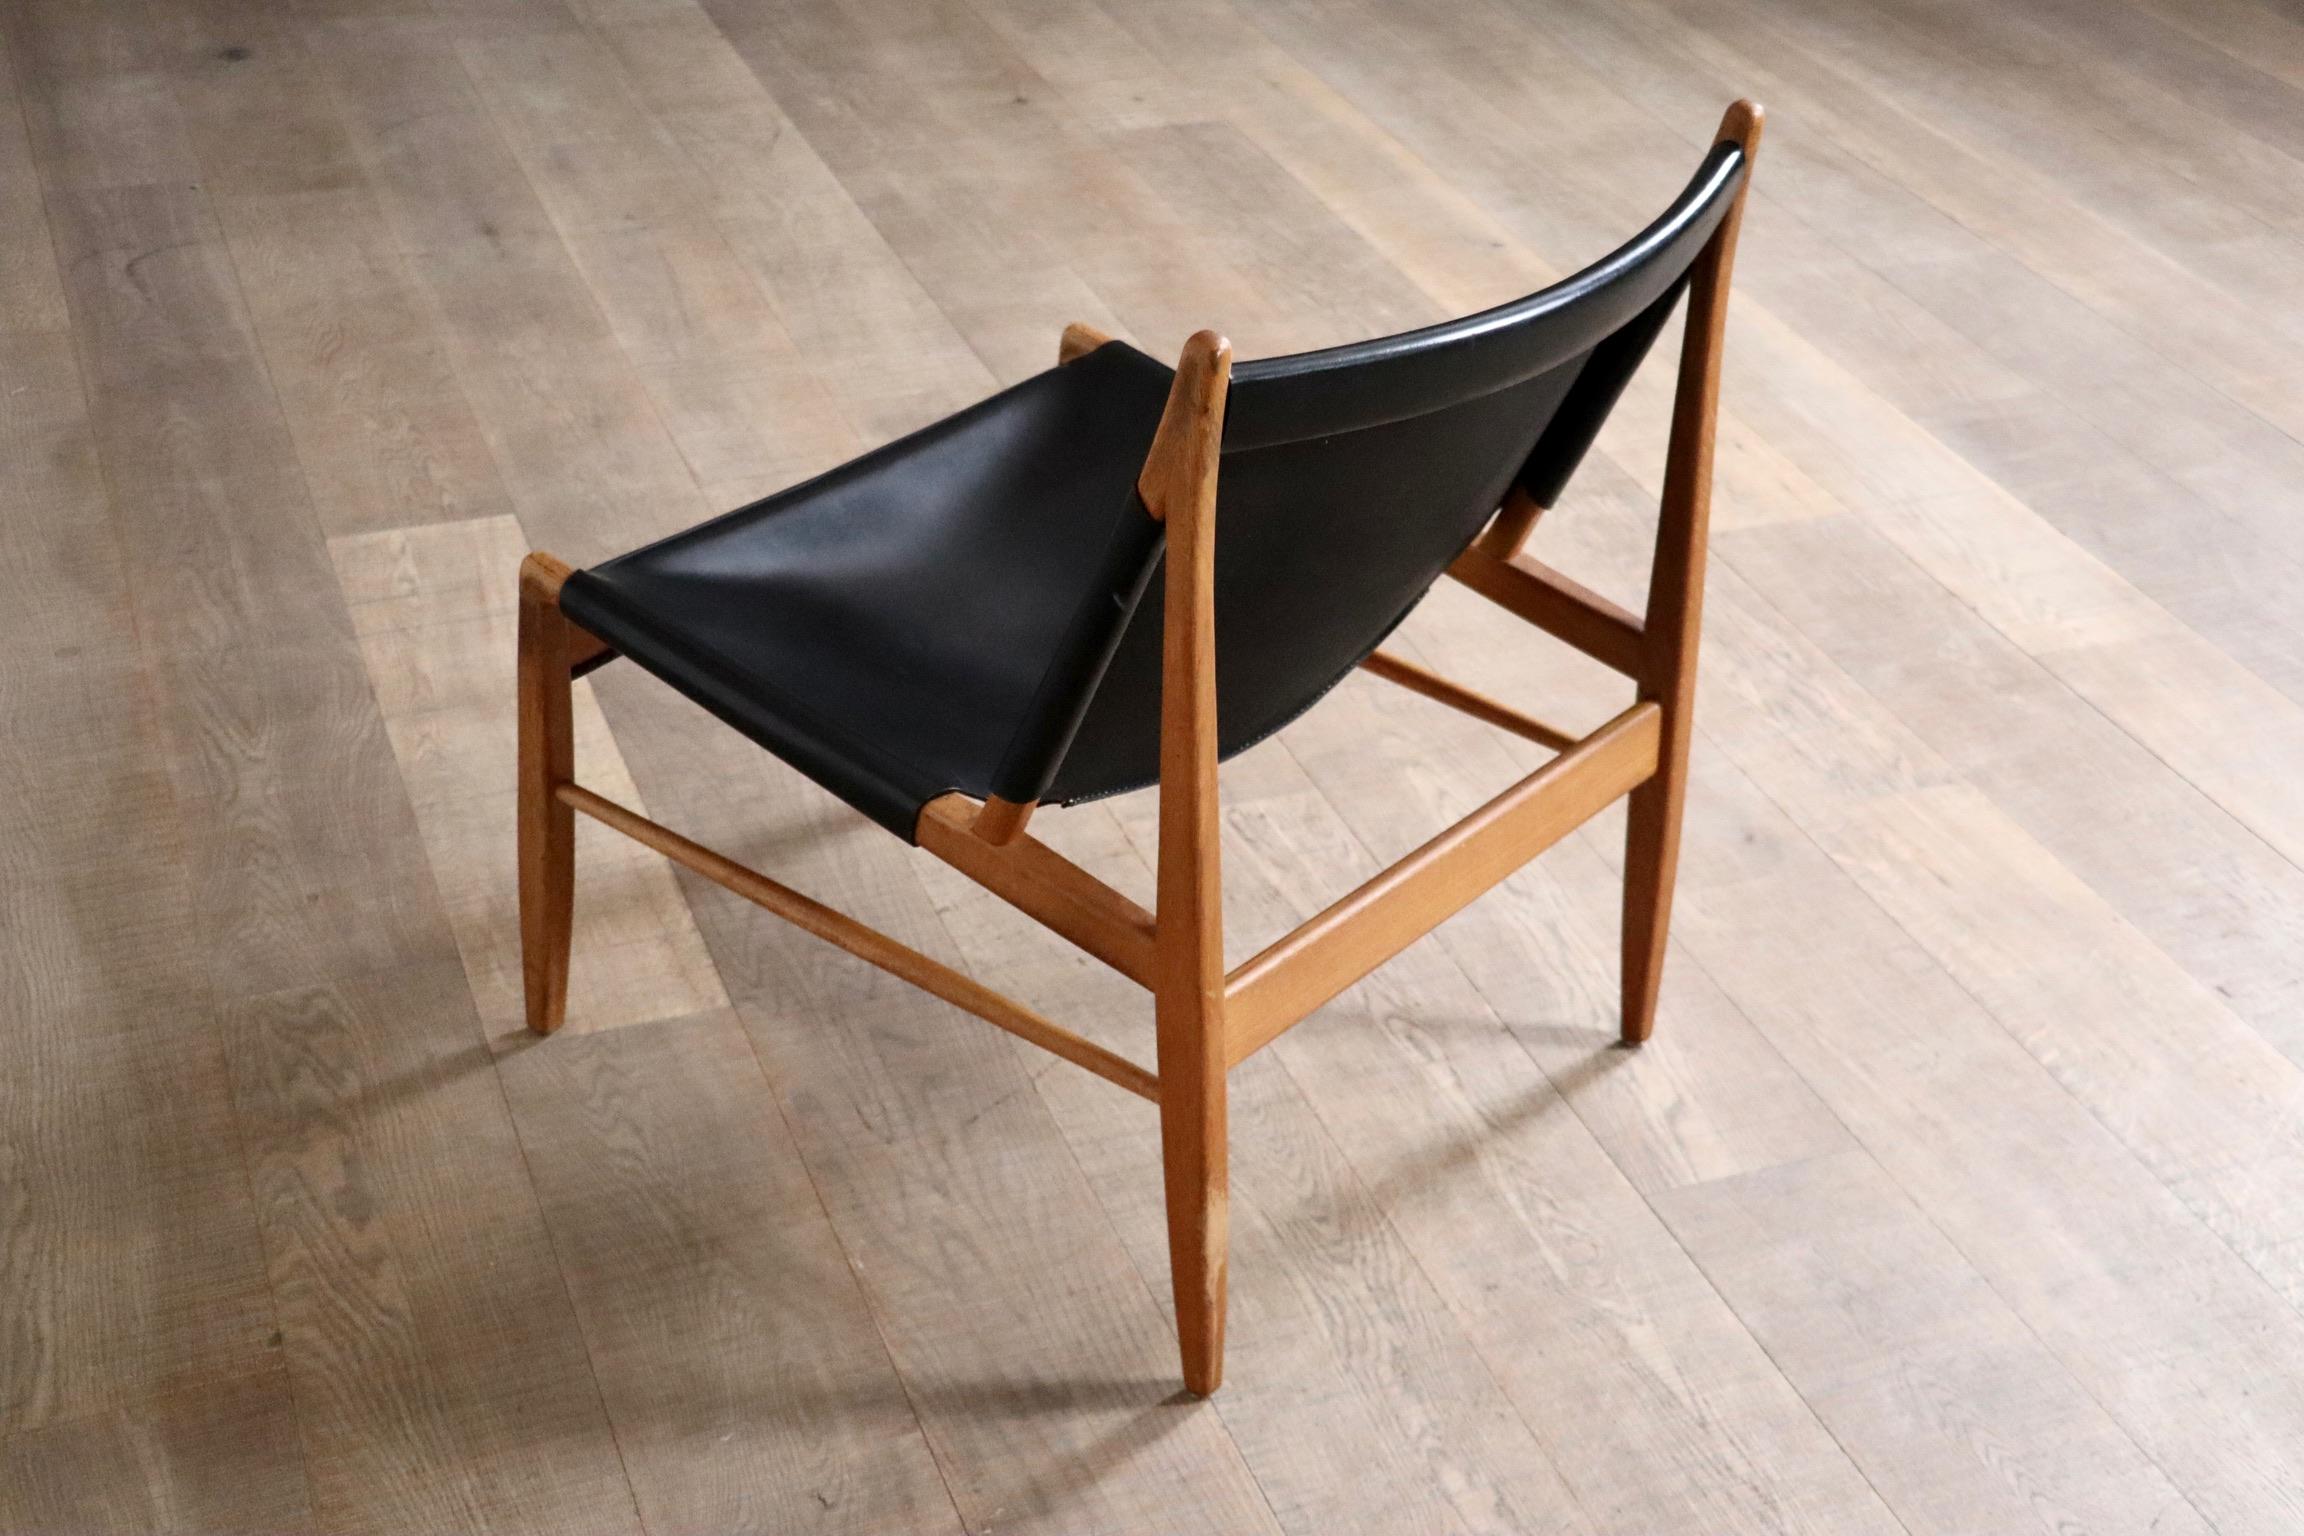 Chimney Lounge Chair Model 1192 By Franz Xaver Lutz For WK Möbel, 1958 For Sale 5